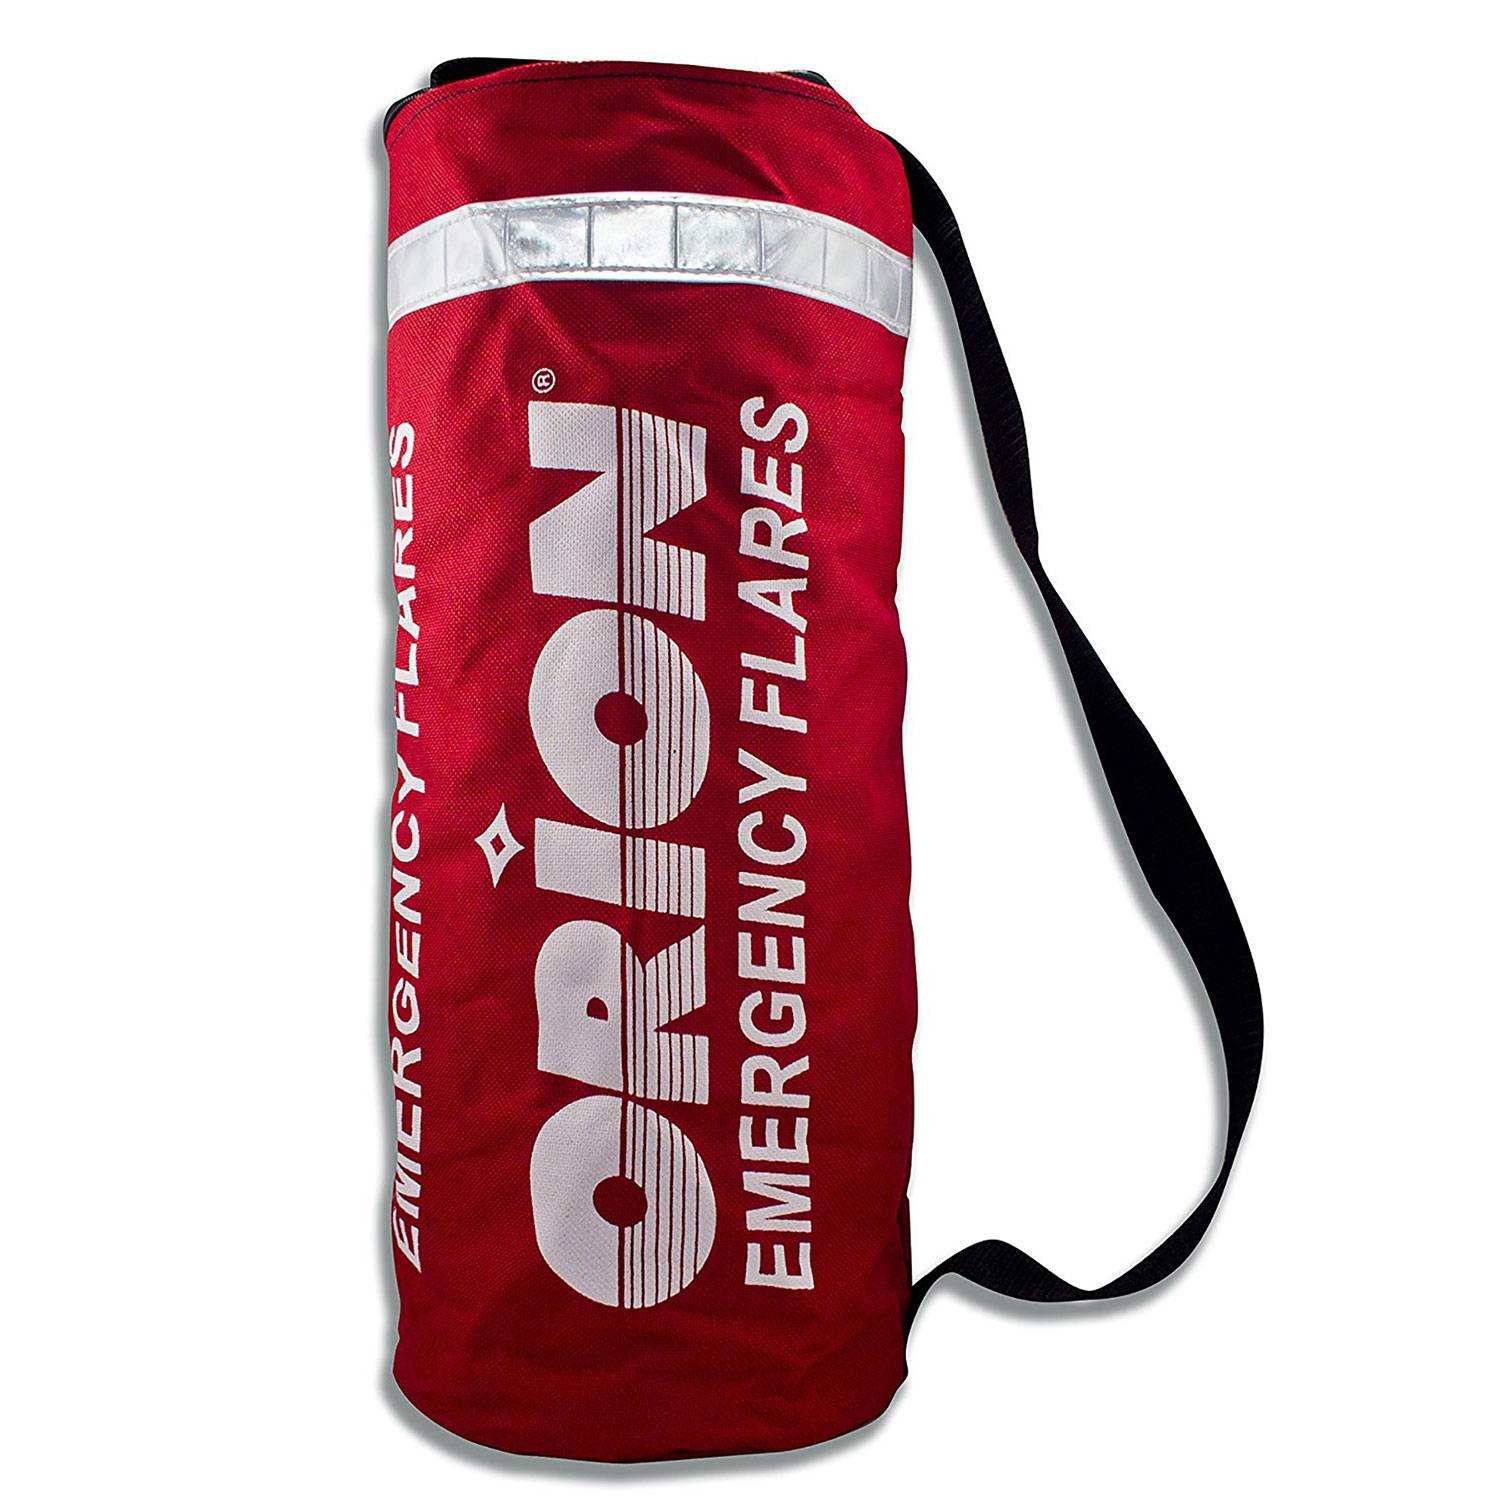 Orion 7830 Heavy Duty Flare Storage Bag for 30 Minute Flares